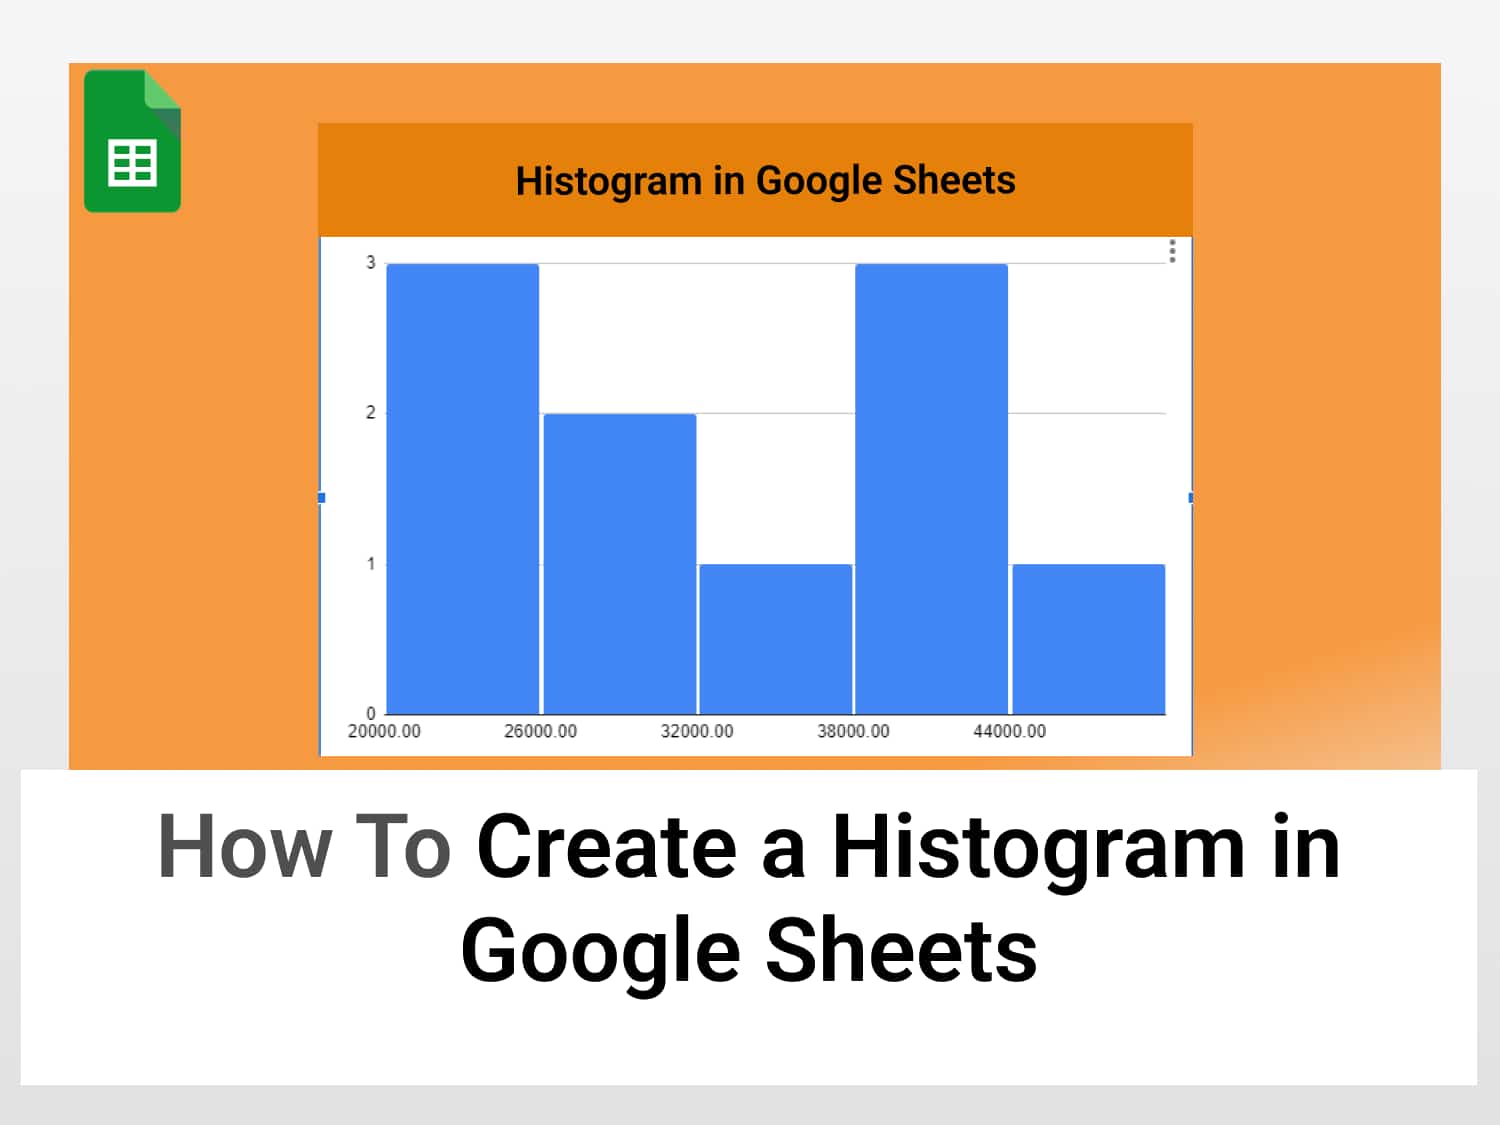 How to create a histogram in Google Sheets